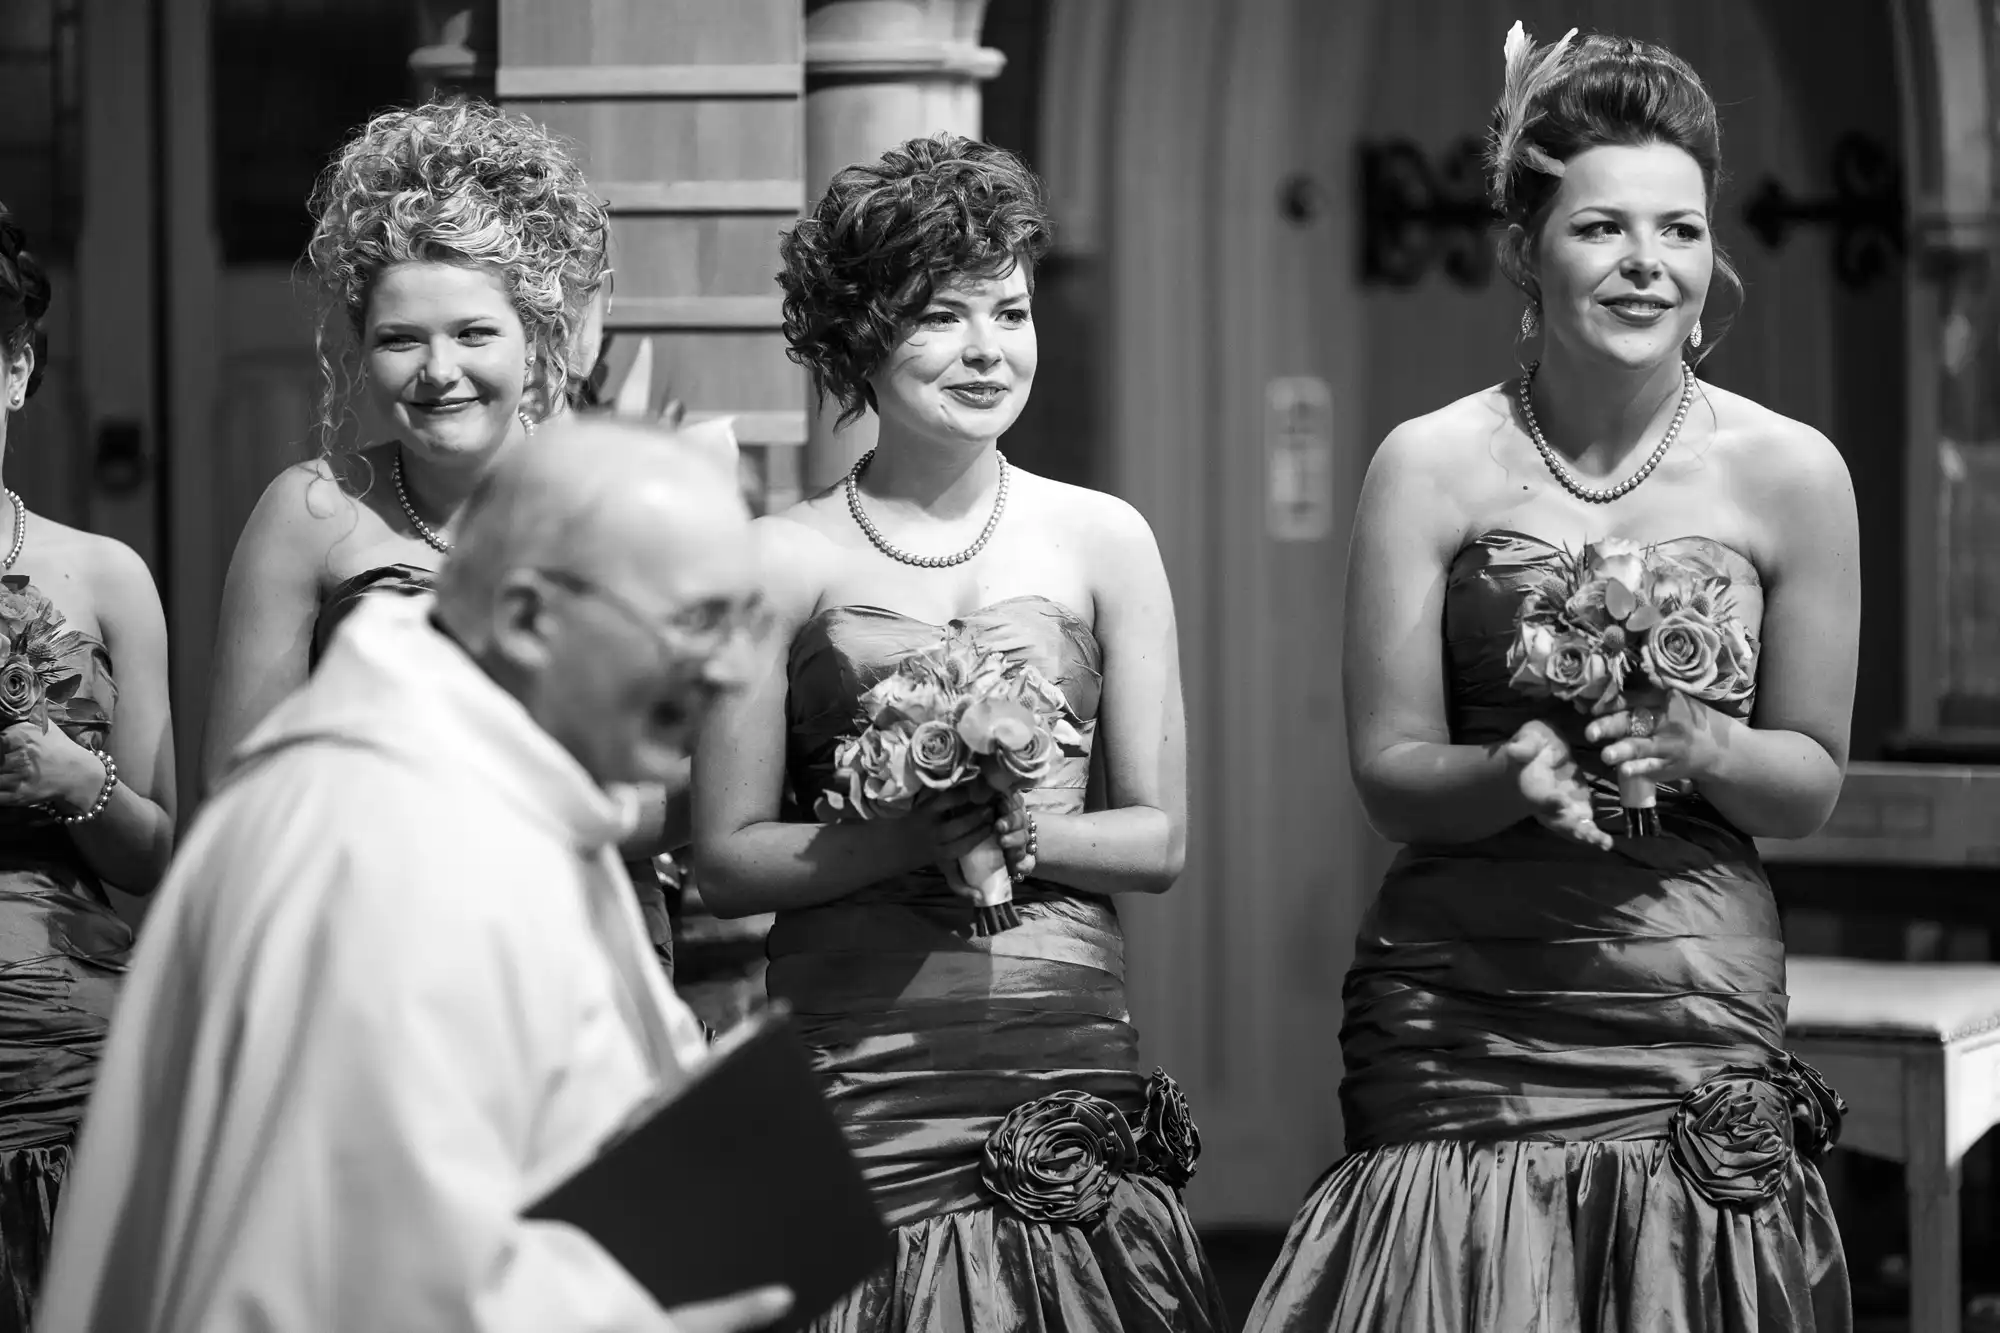 Three bridesmaids in elegant dresses with rosette details, smiling during a wedding ceremony in a black and white photo.